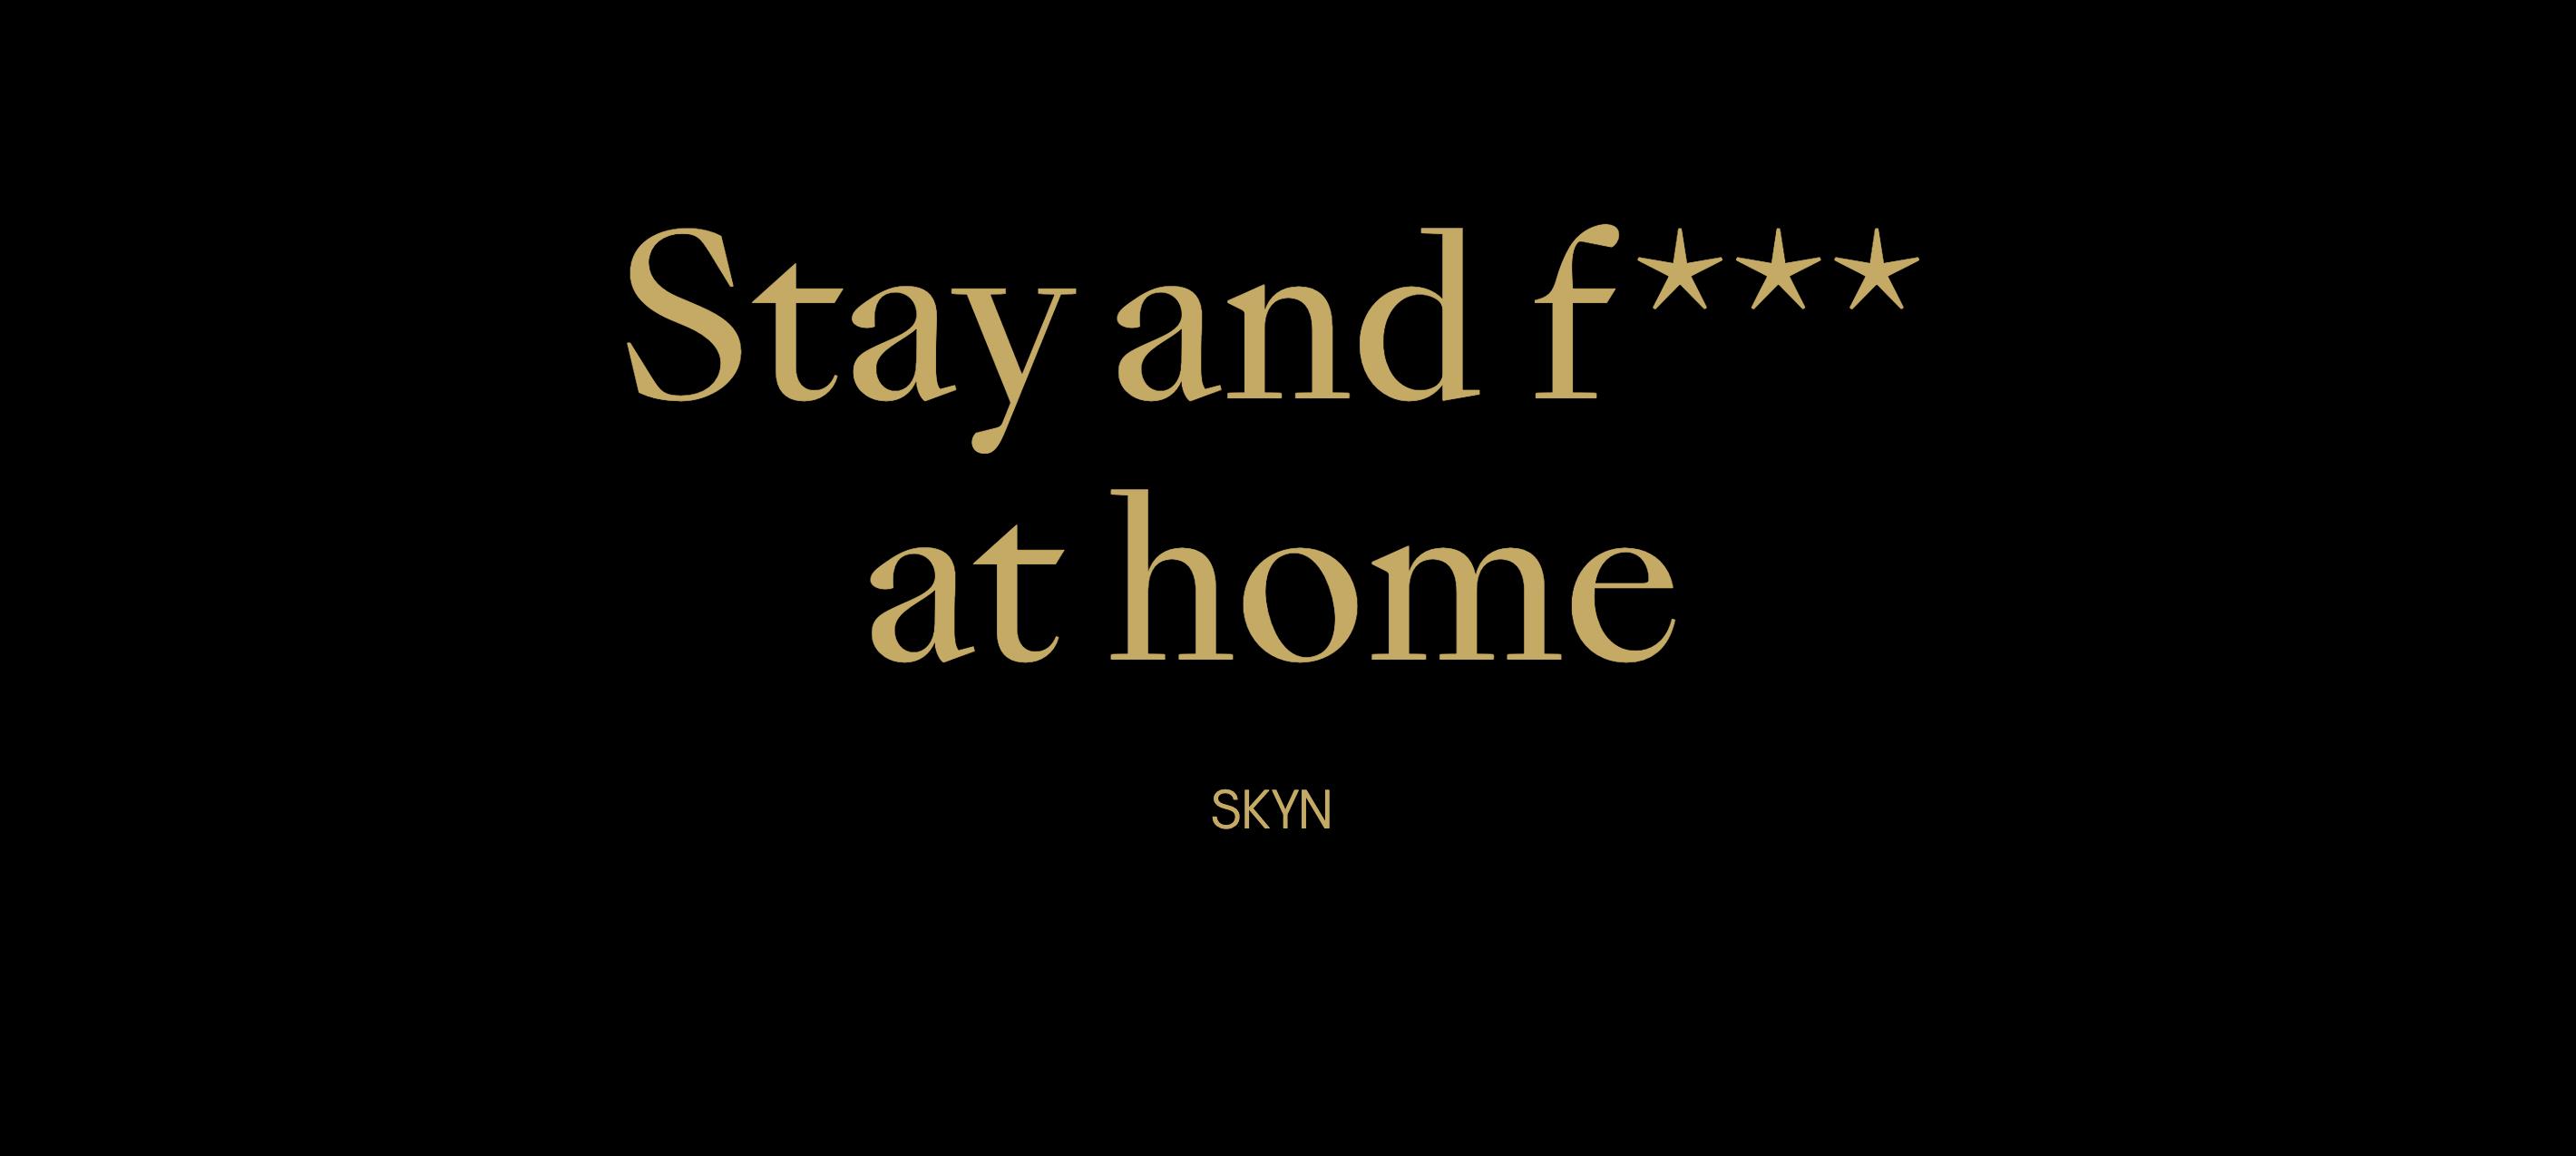 SKYN - Stay and f*** at home Campaign